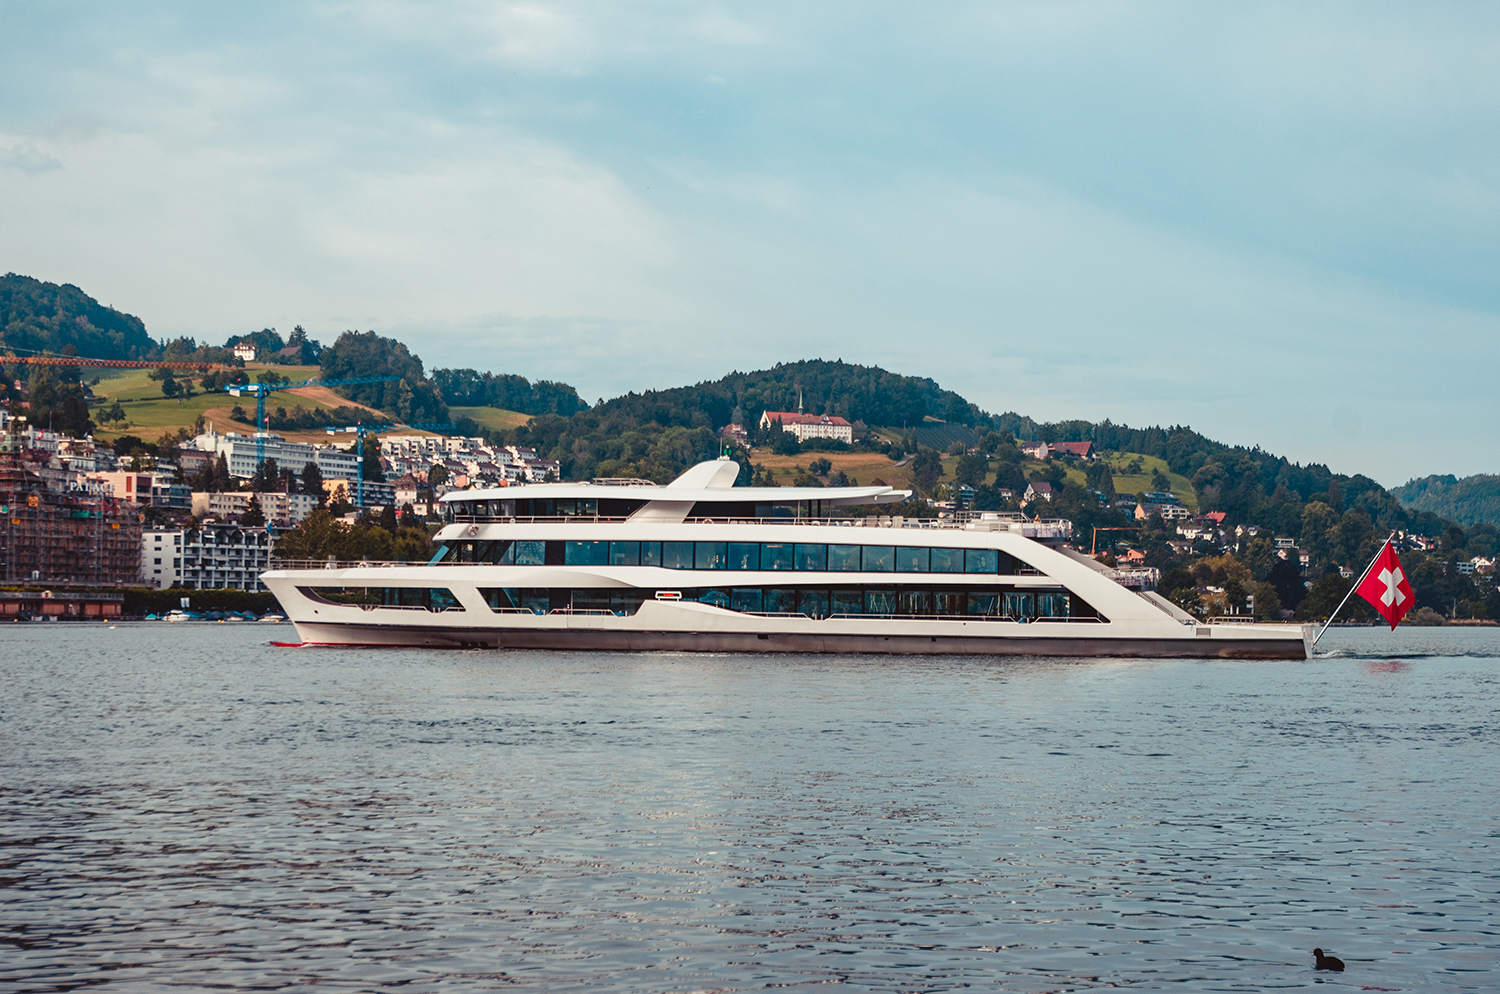 A Stromag 2in1 Periflex® VN/MWU Coupling/Clutch assembly was recently installed on the hybrid propulsion system onboard Switzerland’s first climate-neutral cruise ship with energy consumption that is 20% less than a conventional ship.